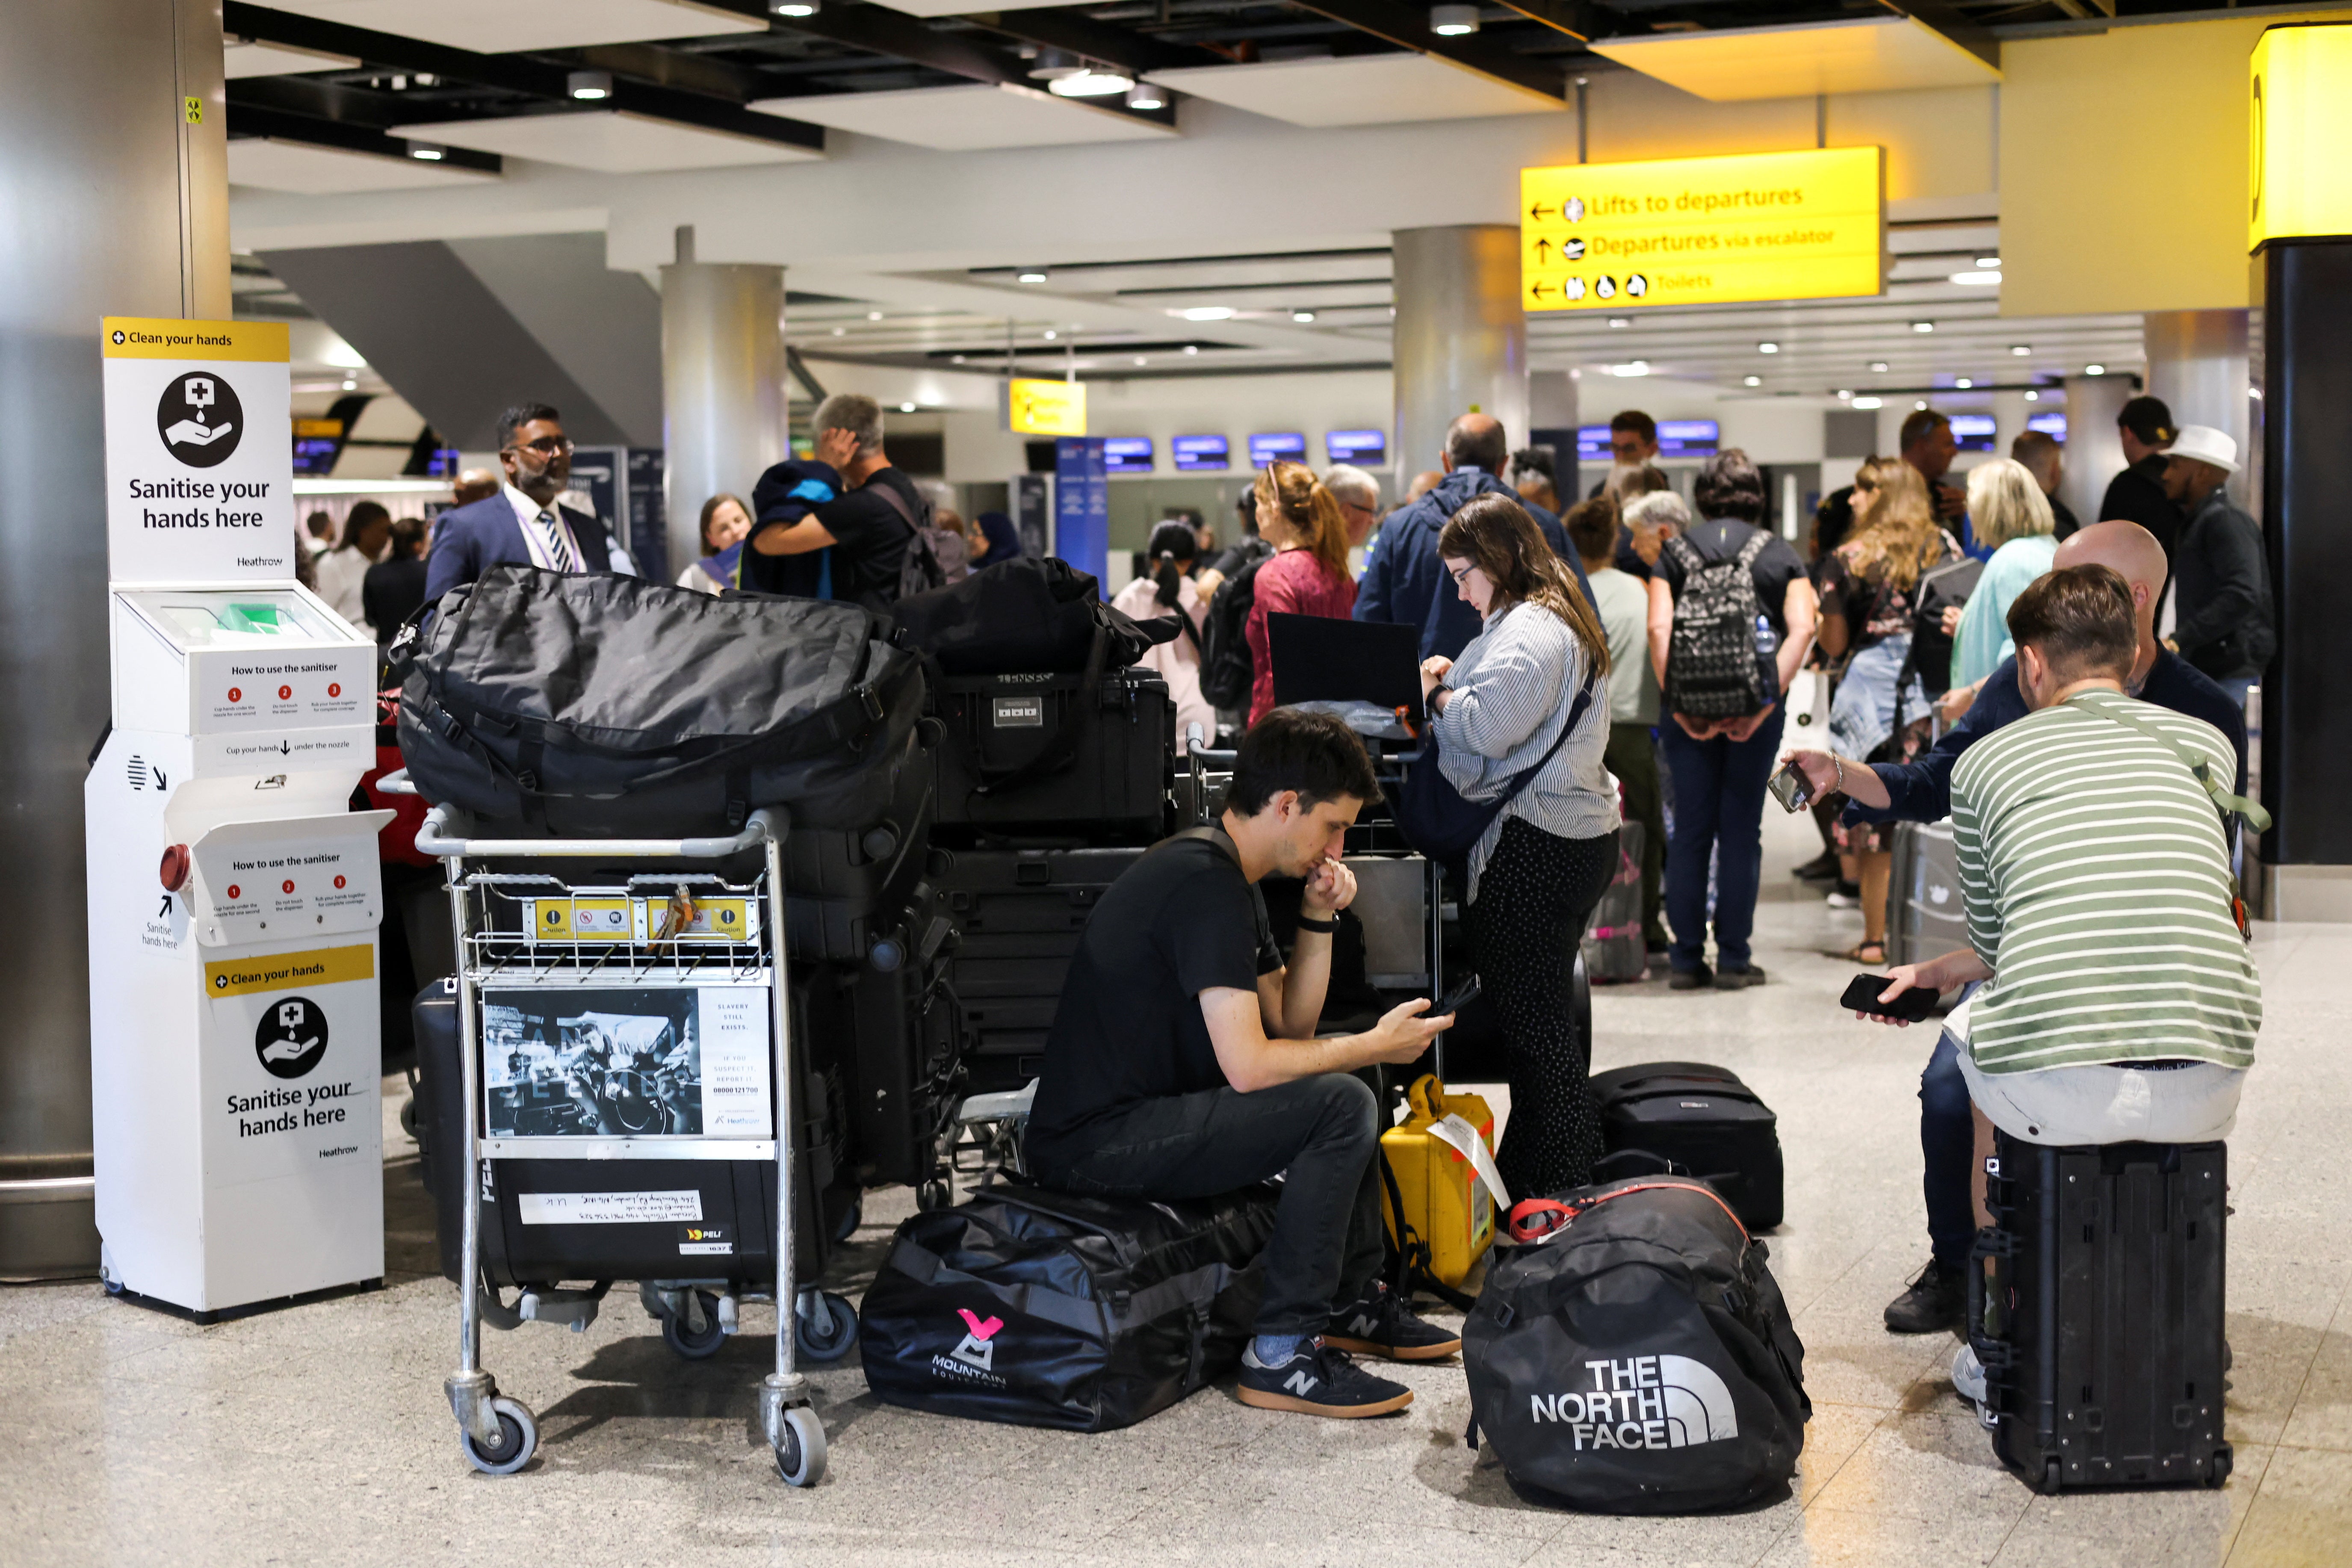 Travellers wait near the British Airways check-in area at Heathrow Airport, as Britain’s National Air Traffic Service (Nats) restricts UK air traffic due to a technical issue causing delays, in London, Britain, 28 August 2023